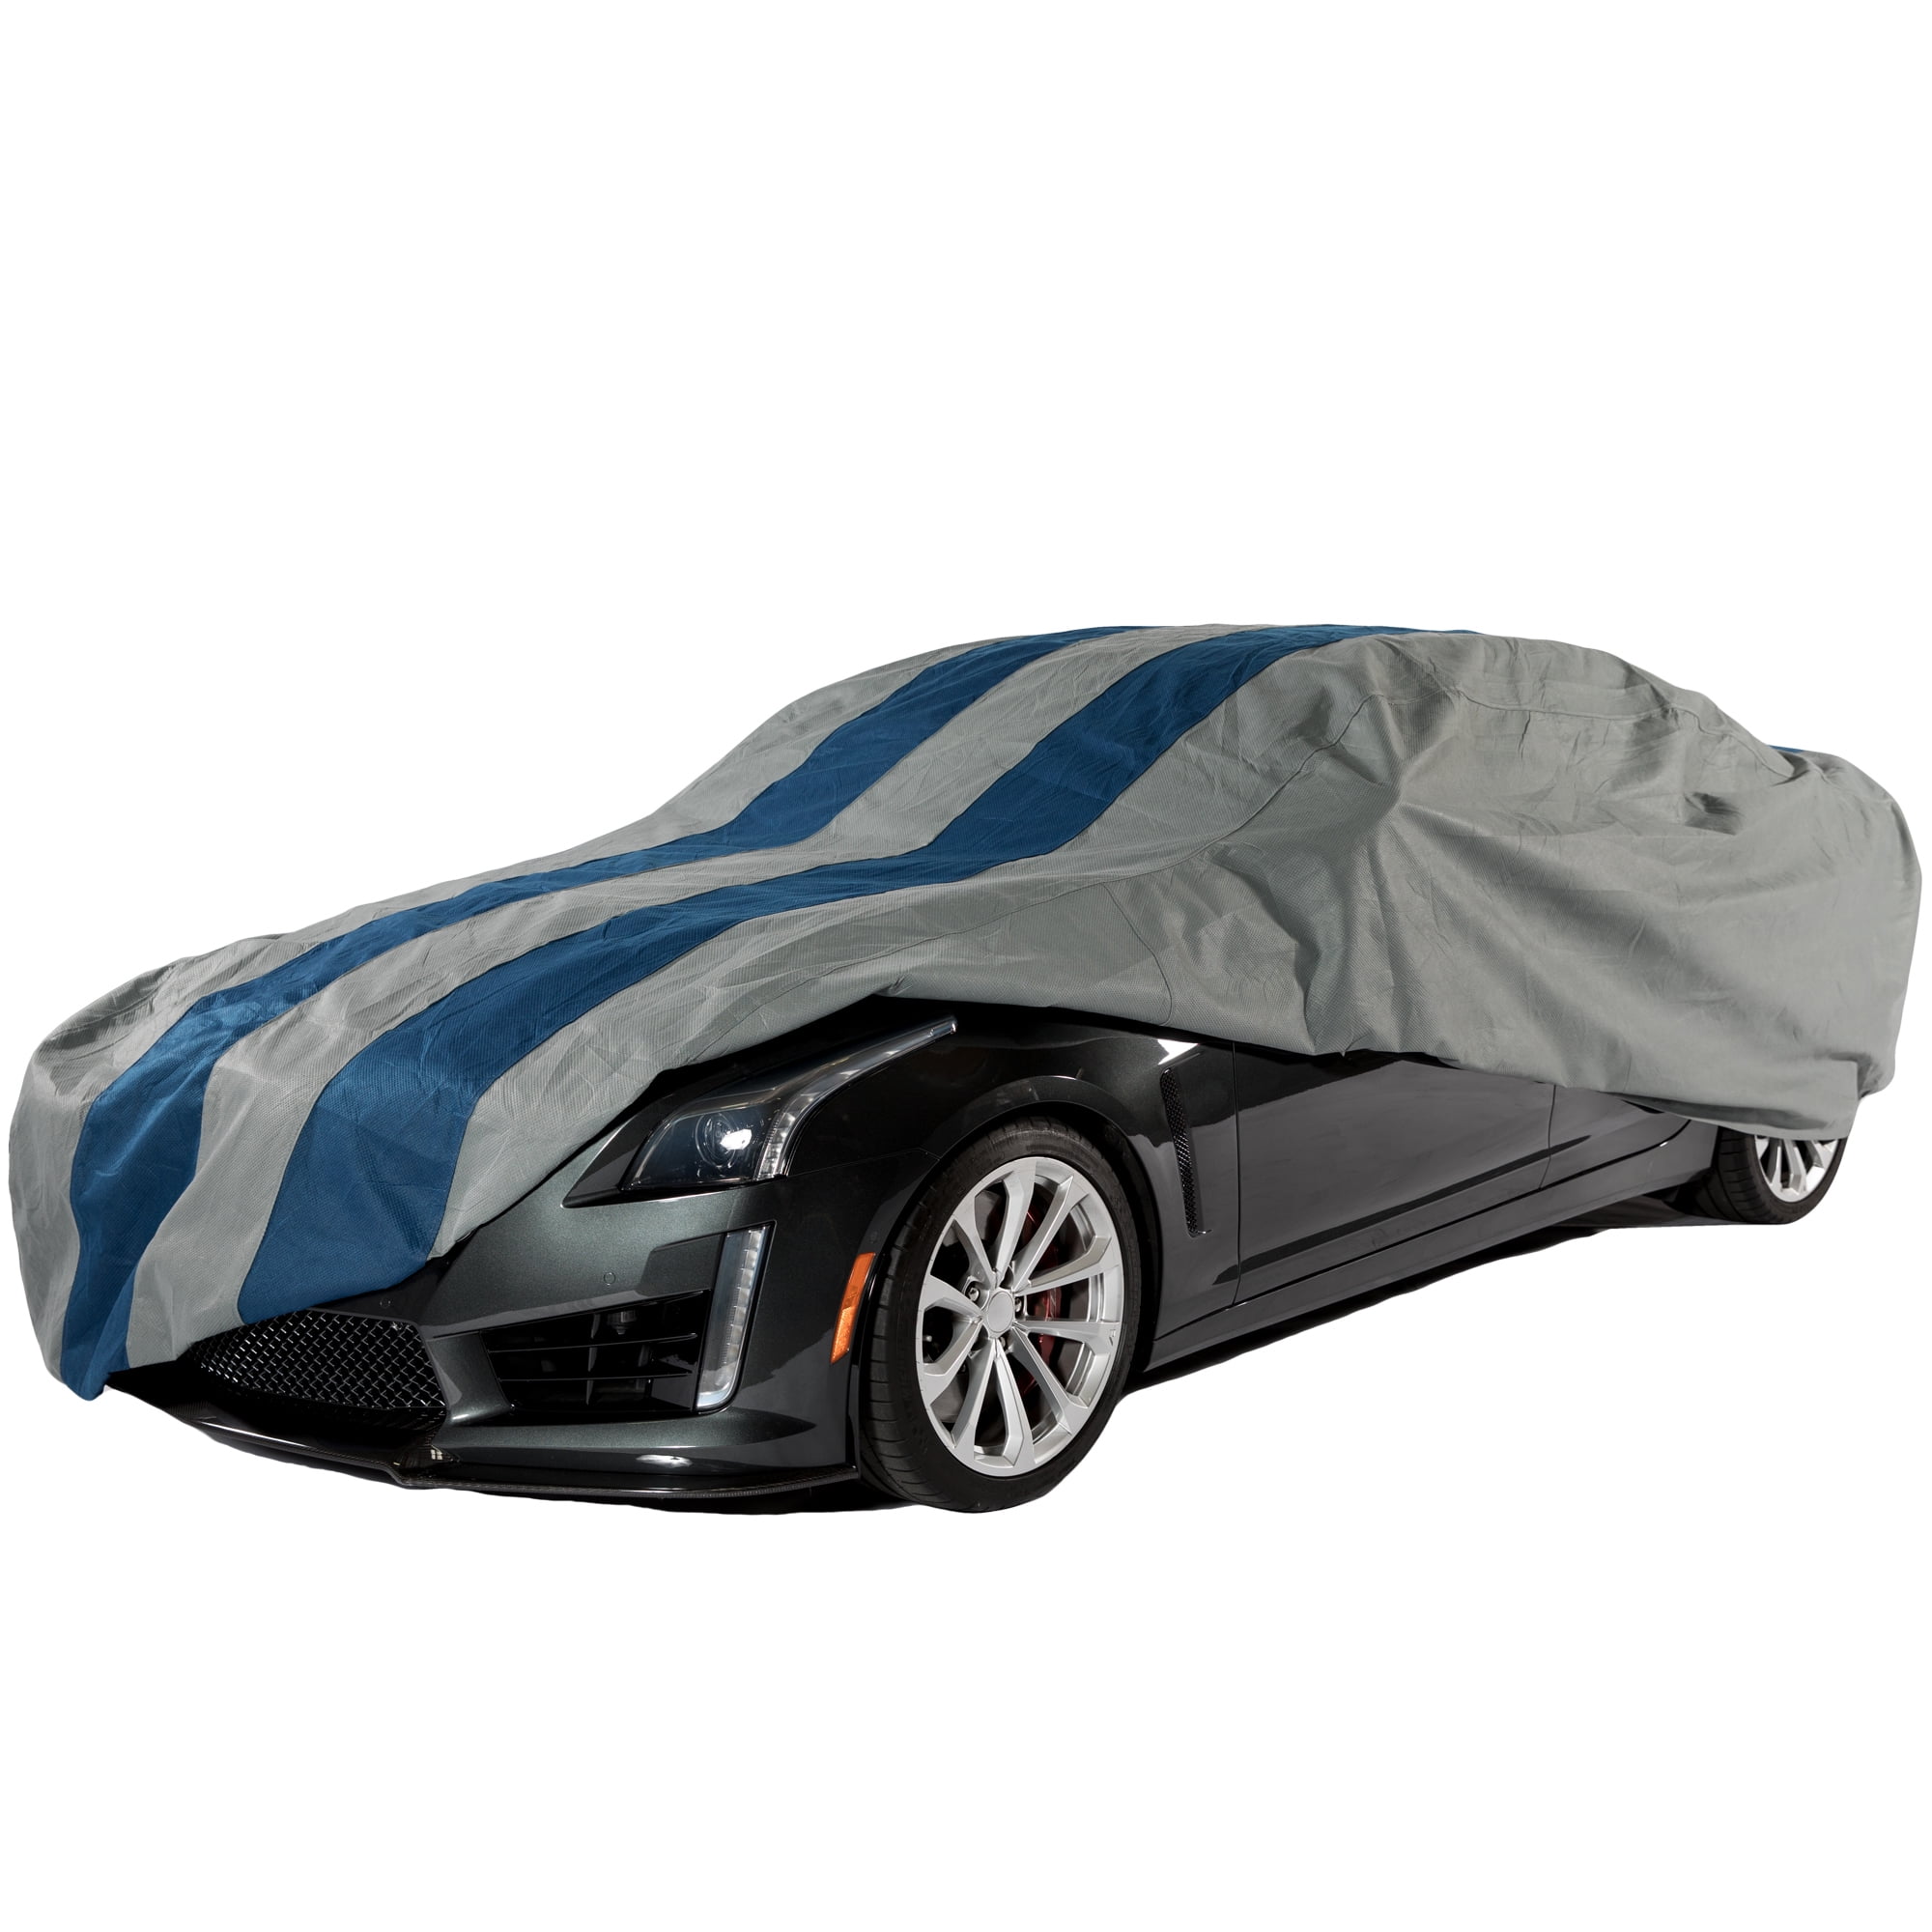 Duck Covers Defender Car Cover for Sedans up to 22 